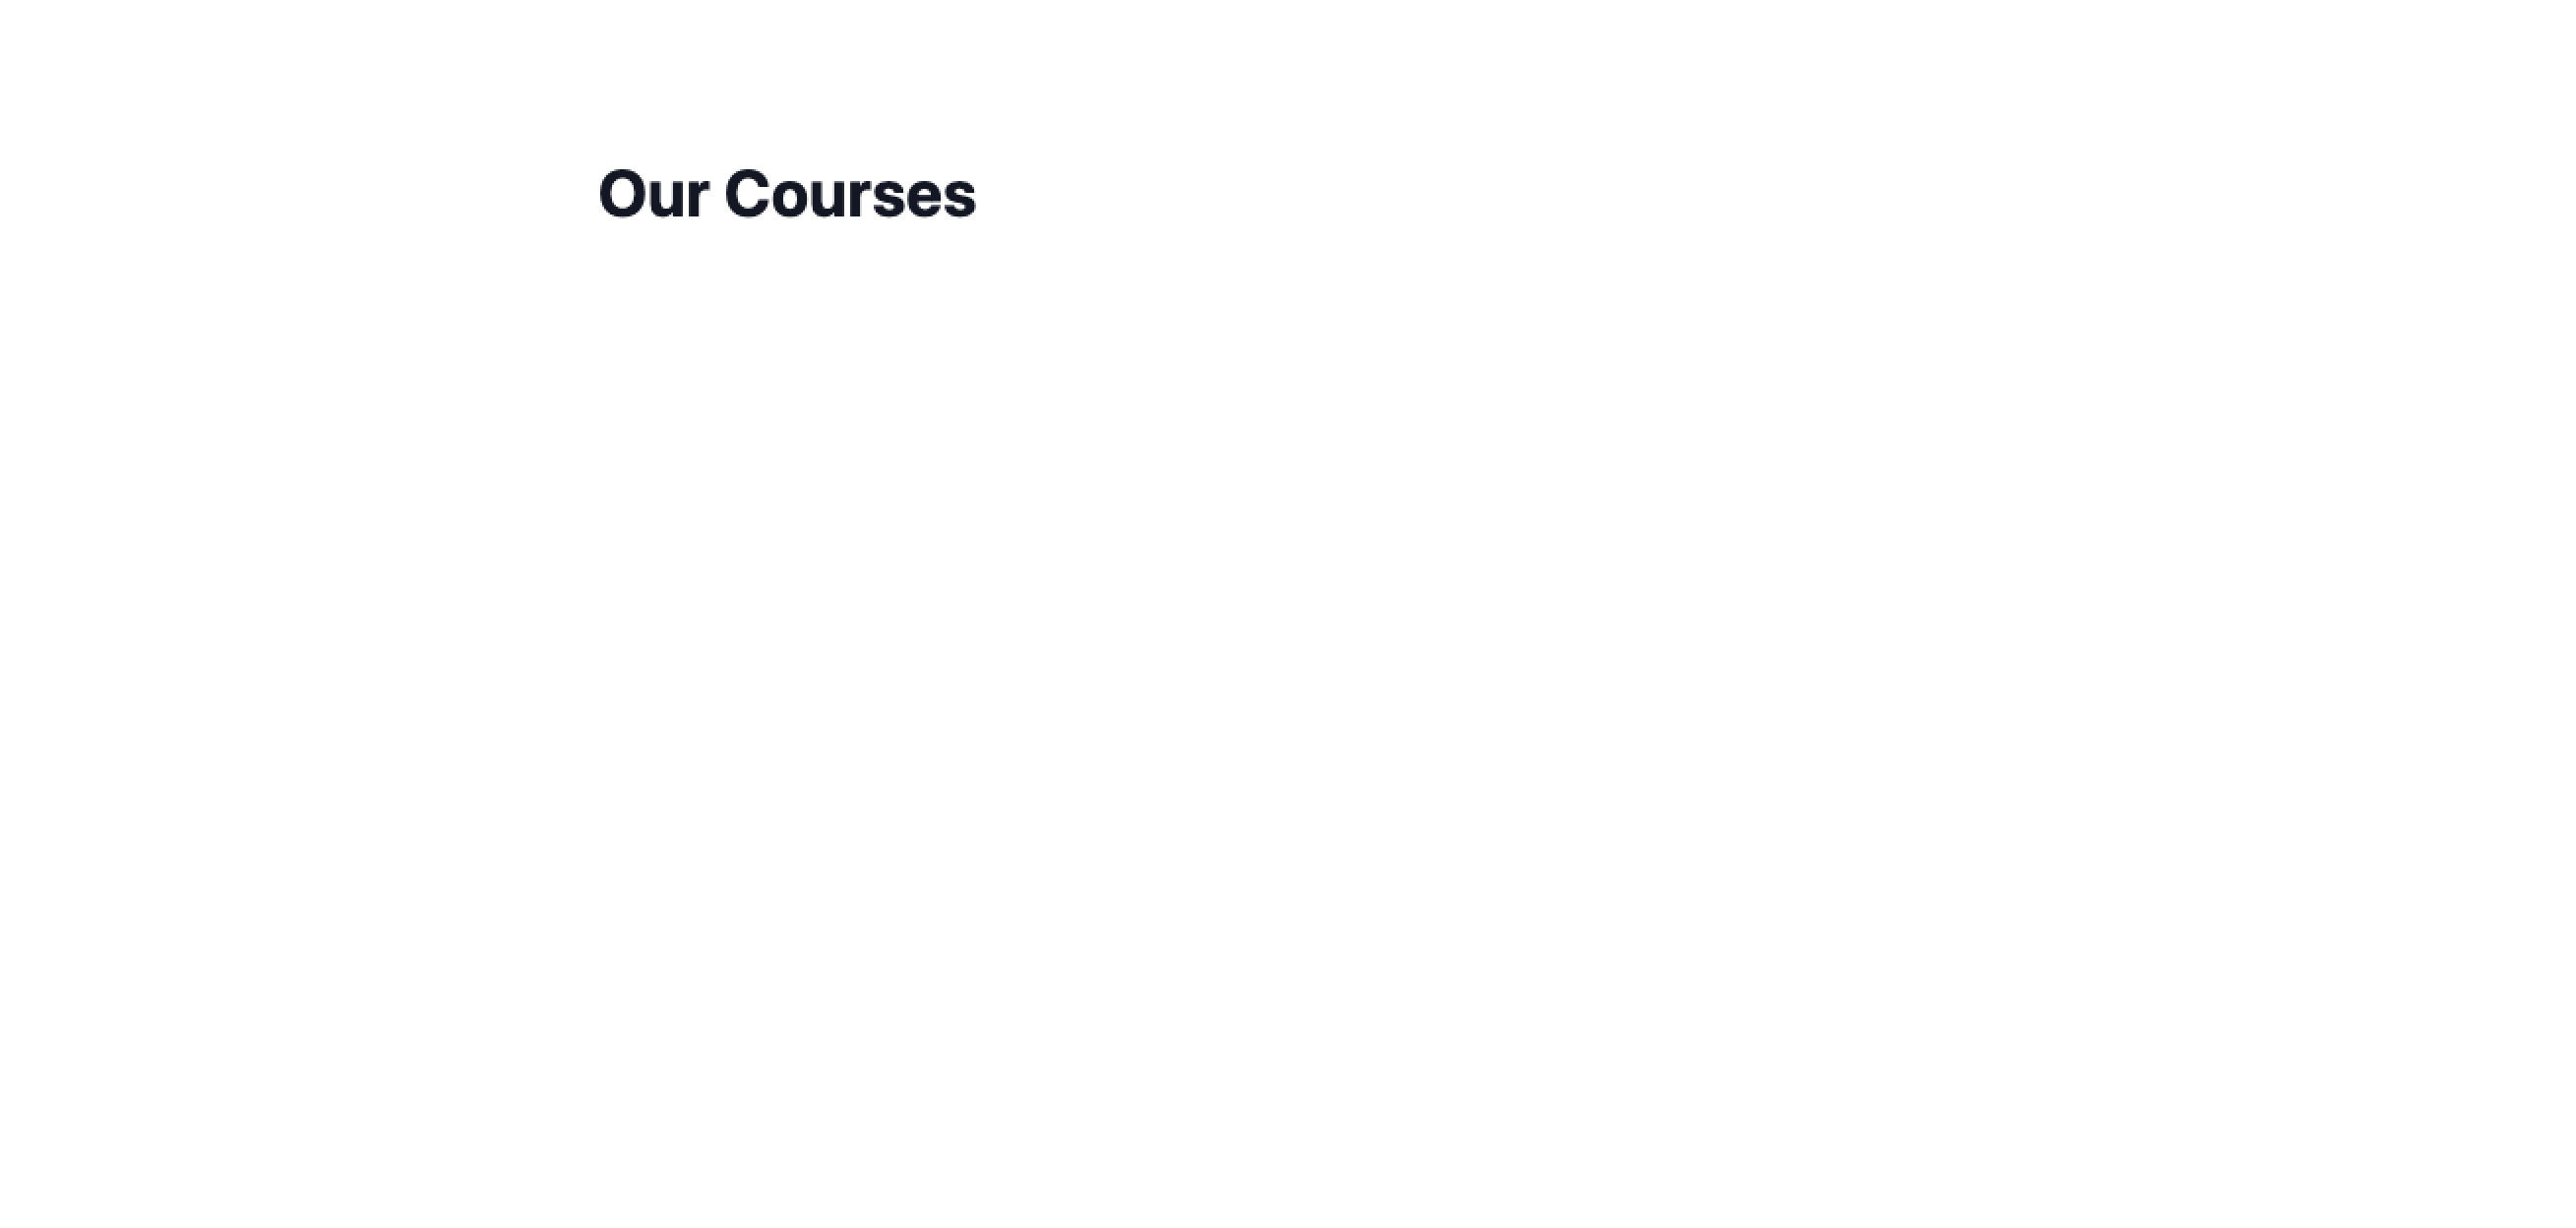 H1 saying "Our courses" centered on the page